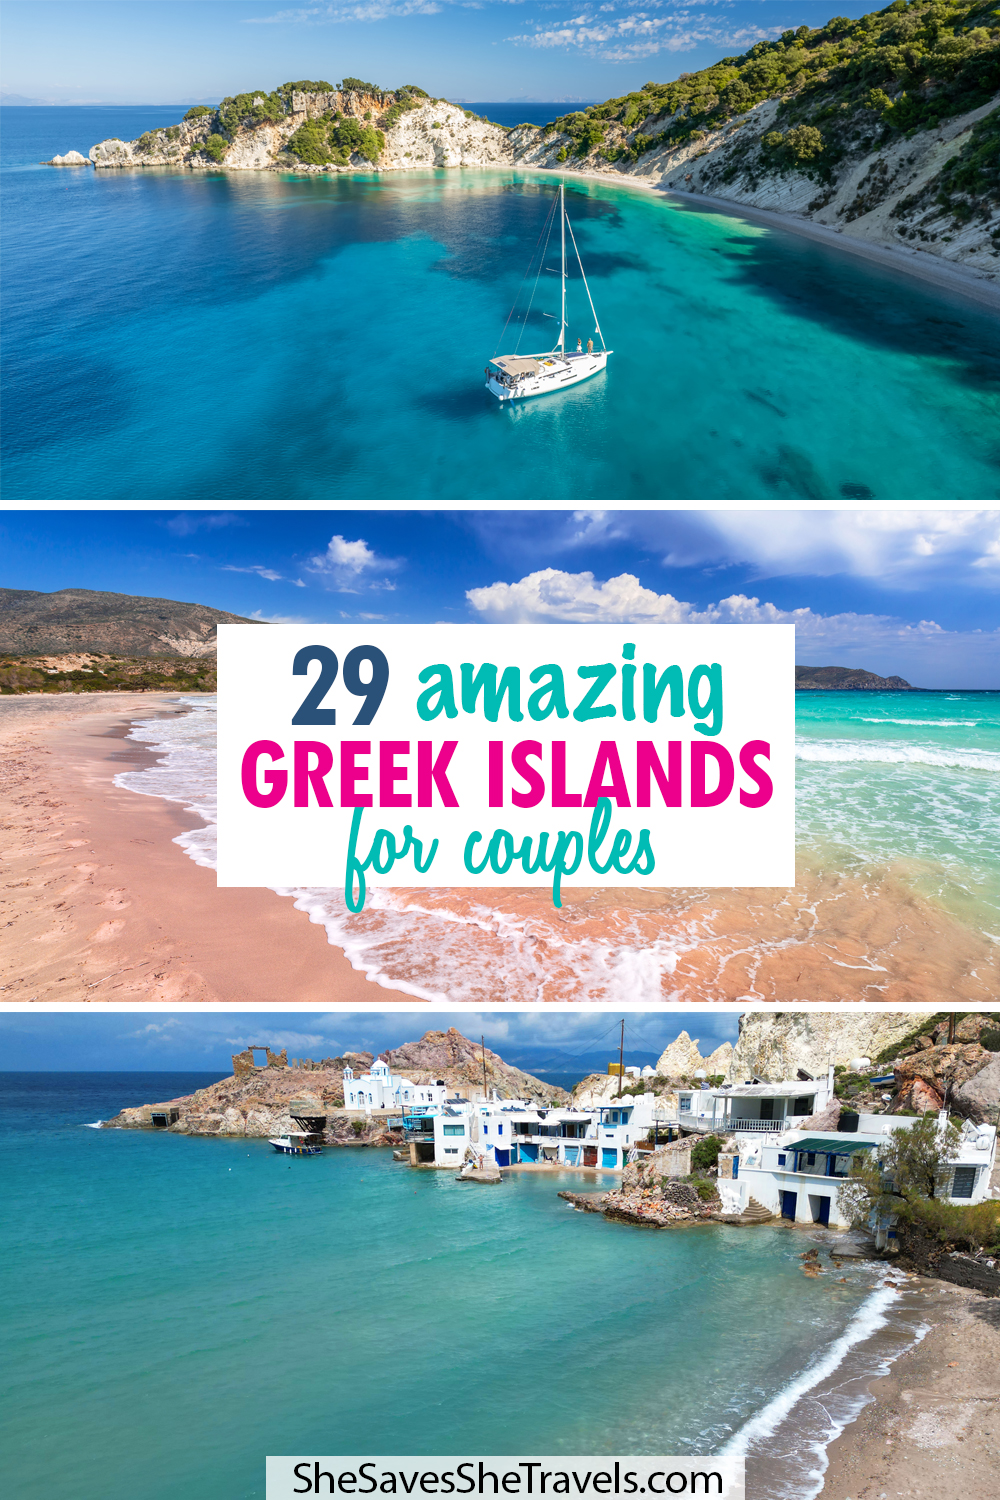 29 amazing greek islands for couples with 3 photos of boat and beach, pink sand and coastline with buildings